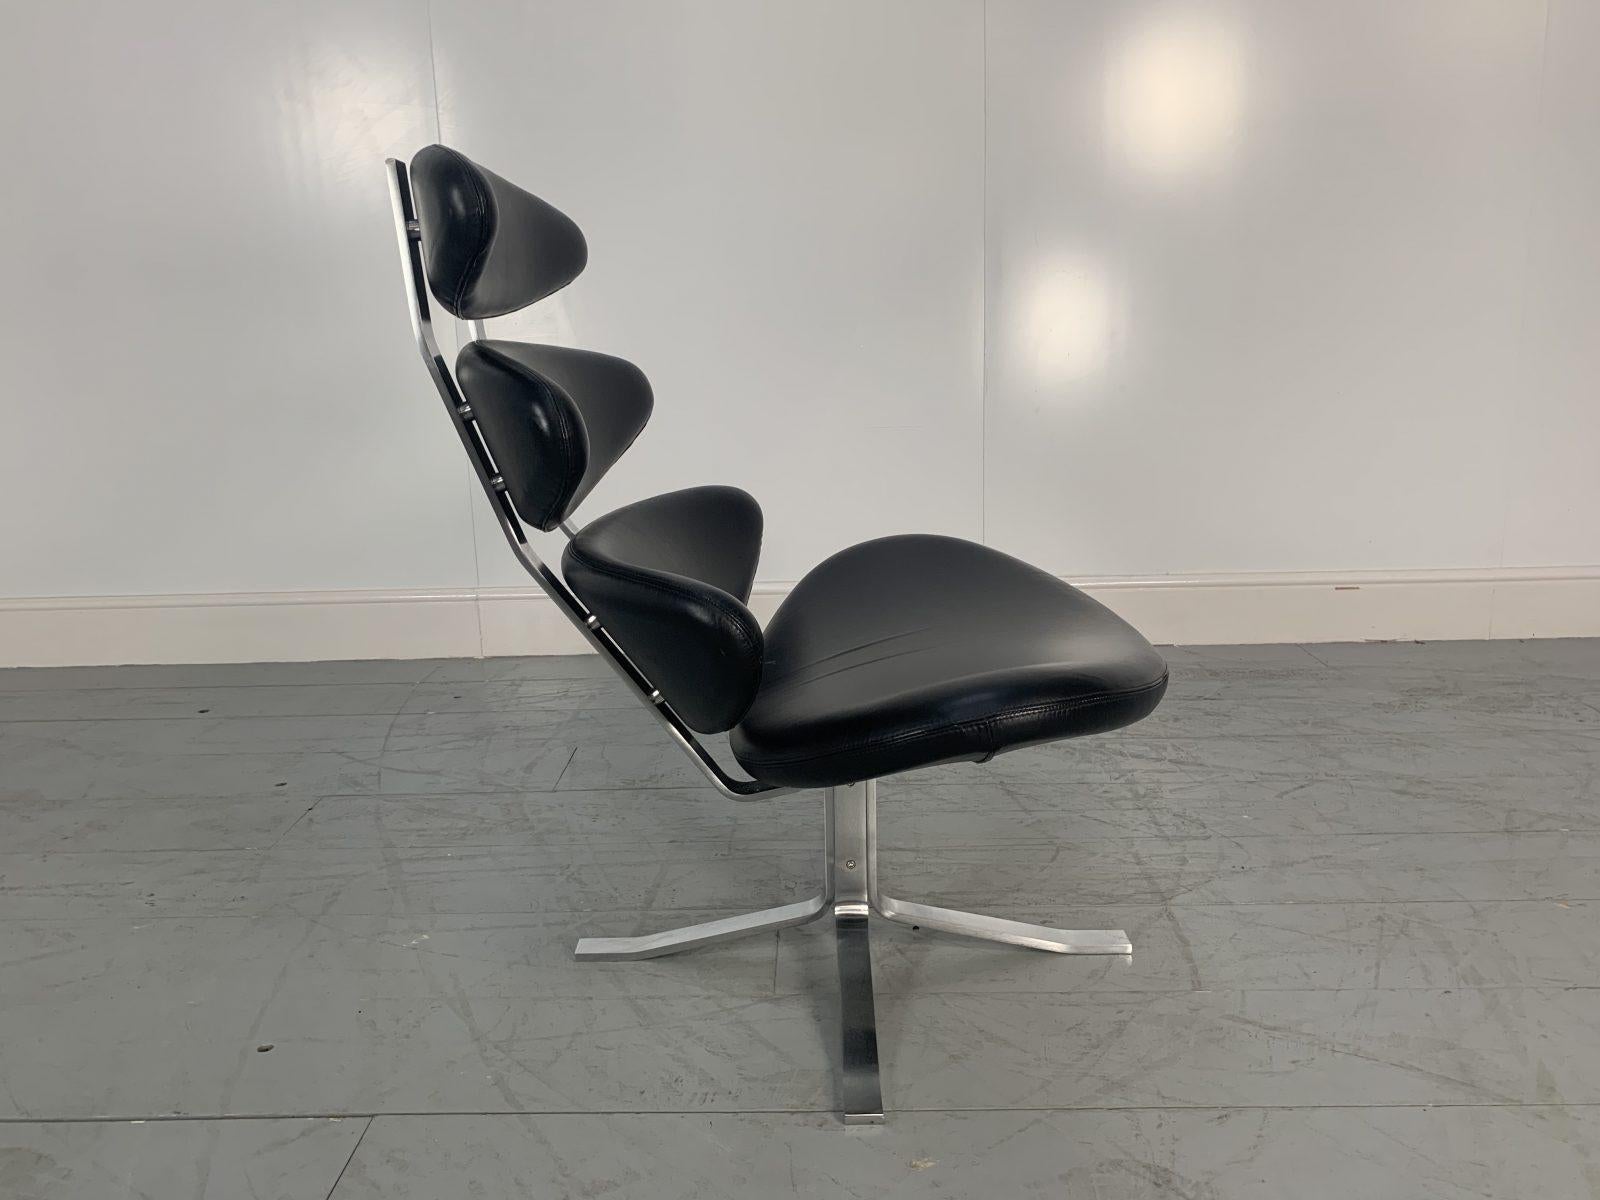 Spectacular Pair of Erik Jorgensen “Corona” EJ5 Chairs in Black “Apache” Leather For Sale 2